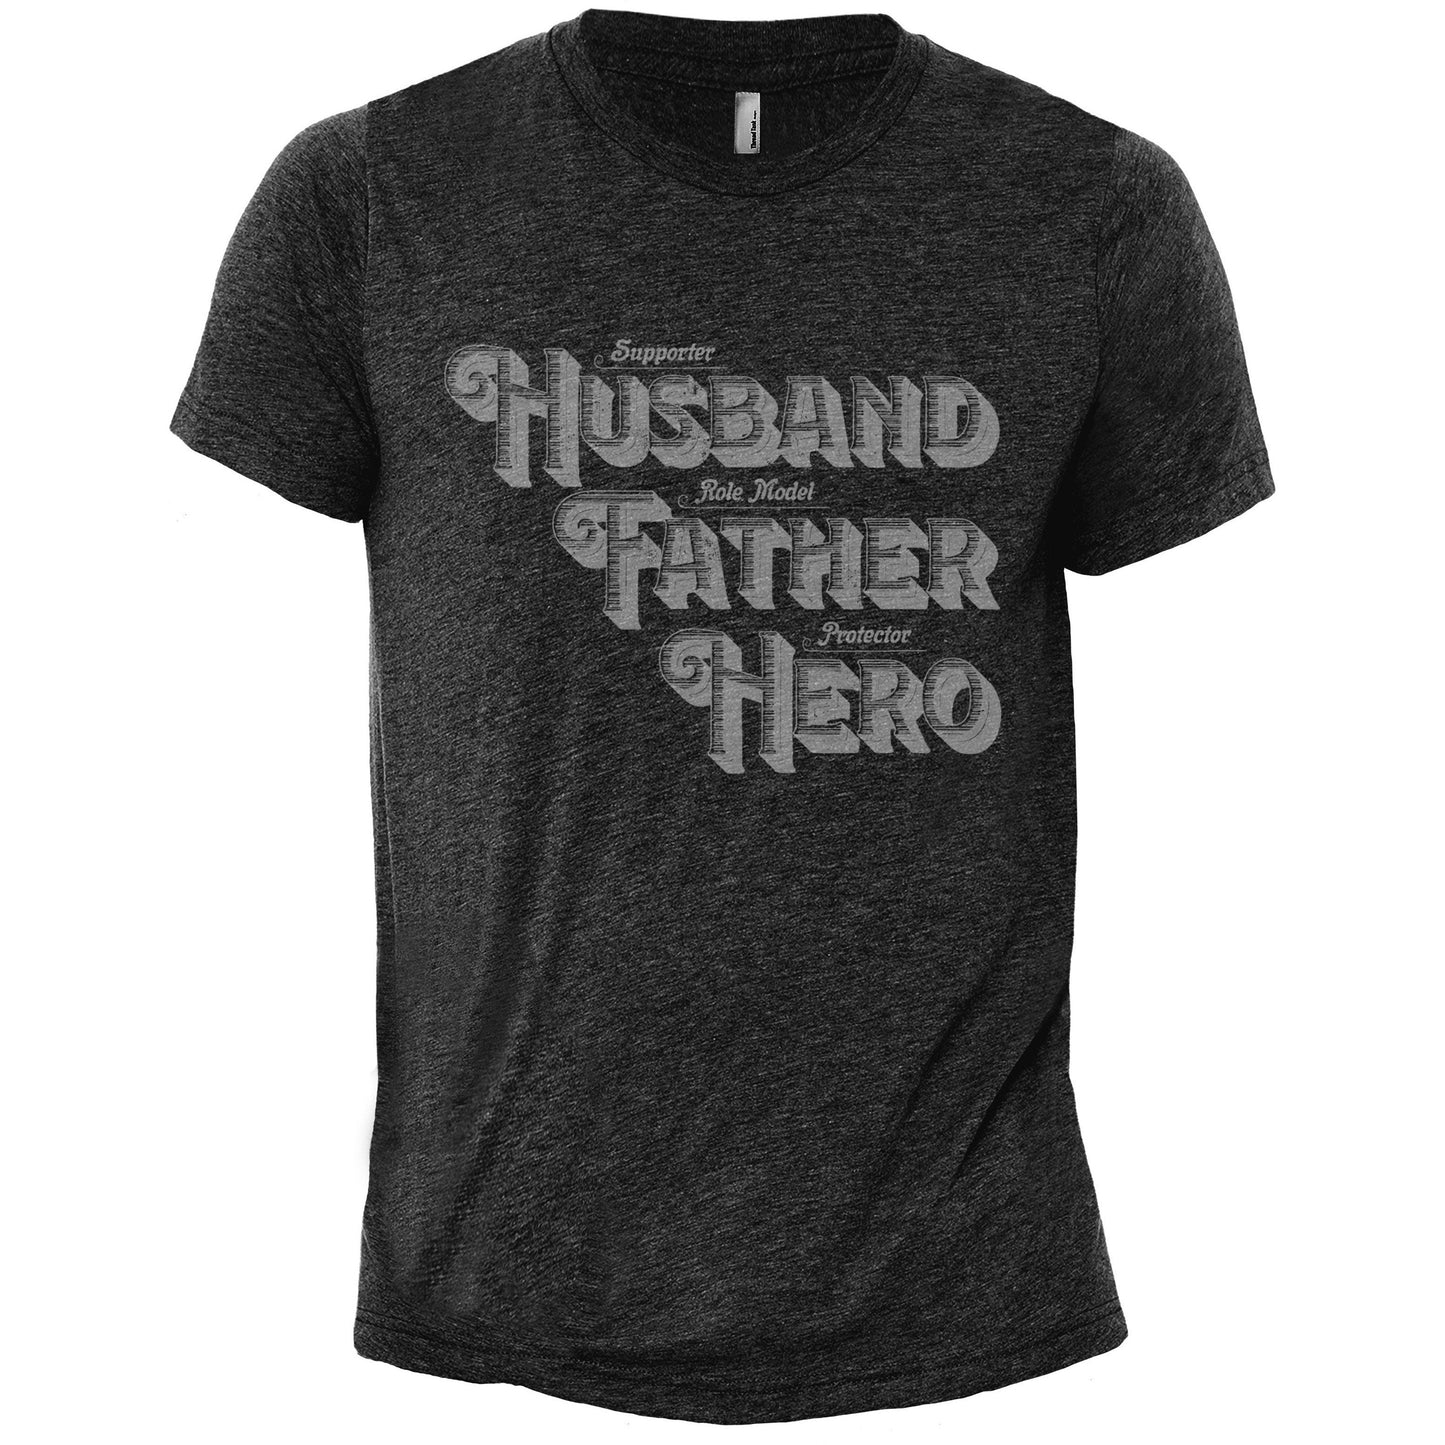 Husband Father Hero Charcoal Printed Graphic Men's Crew T-Shirt Tee